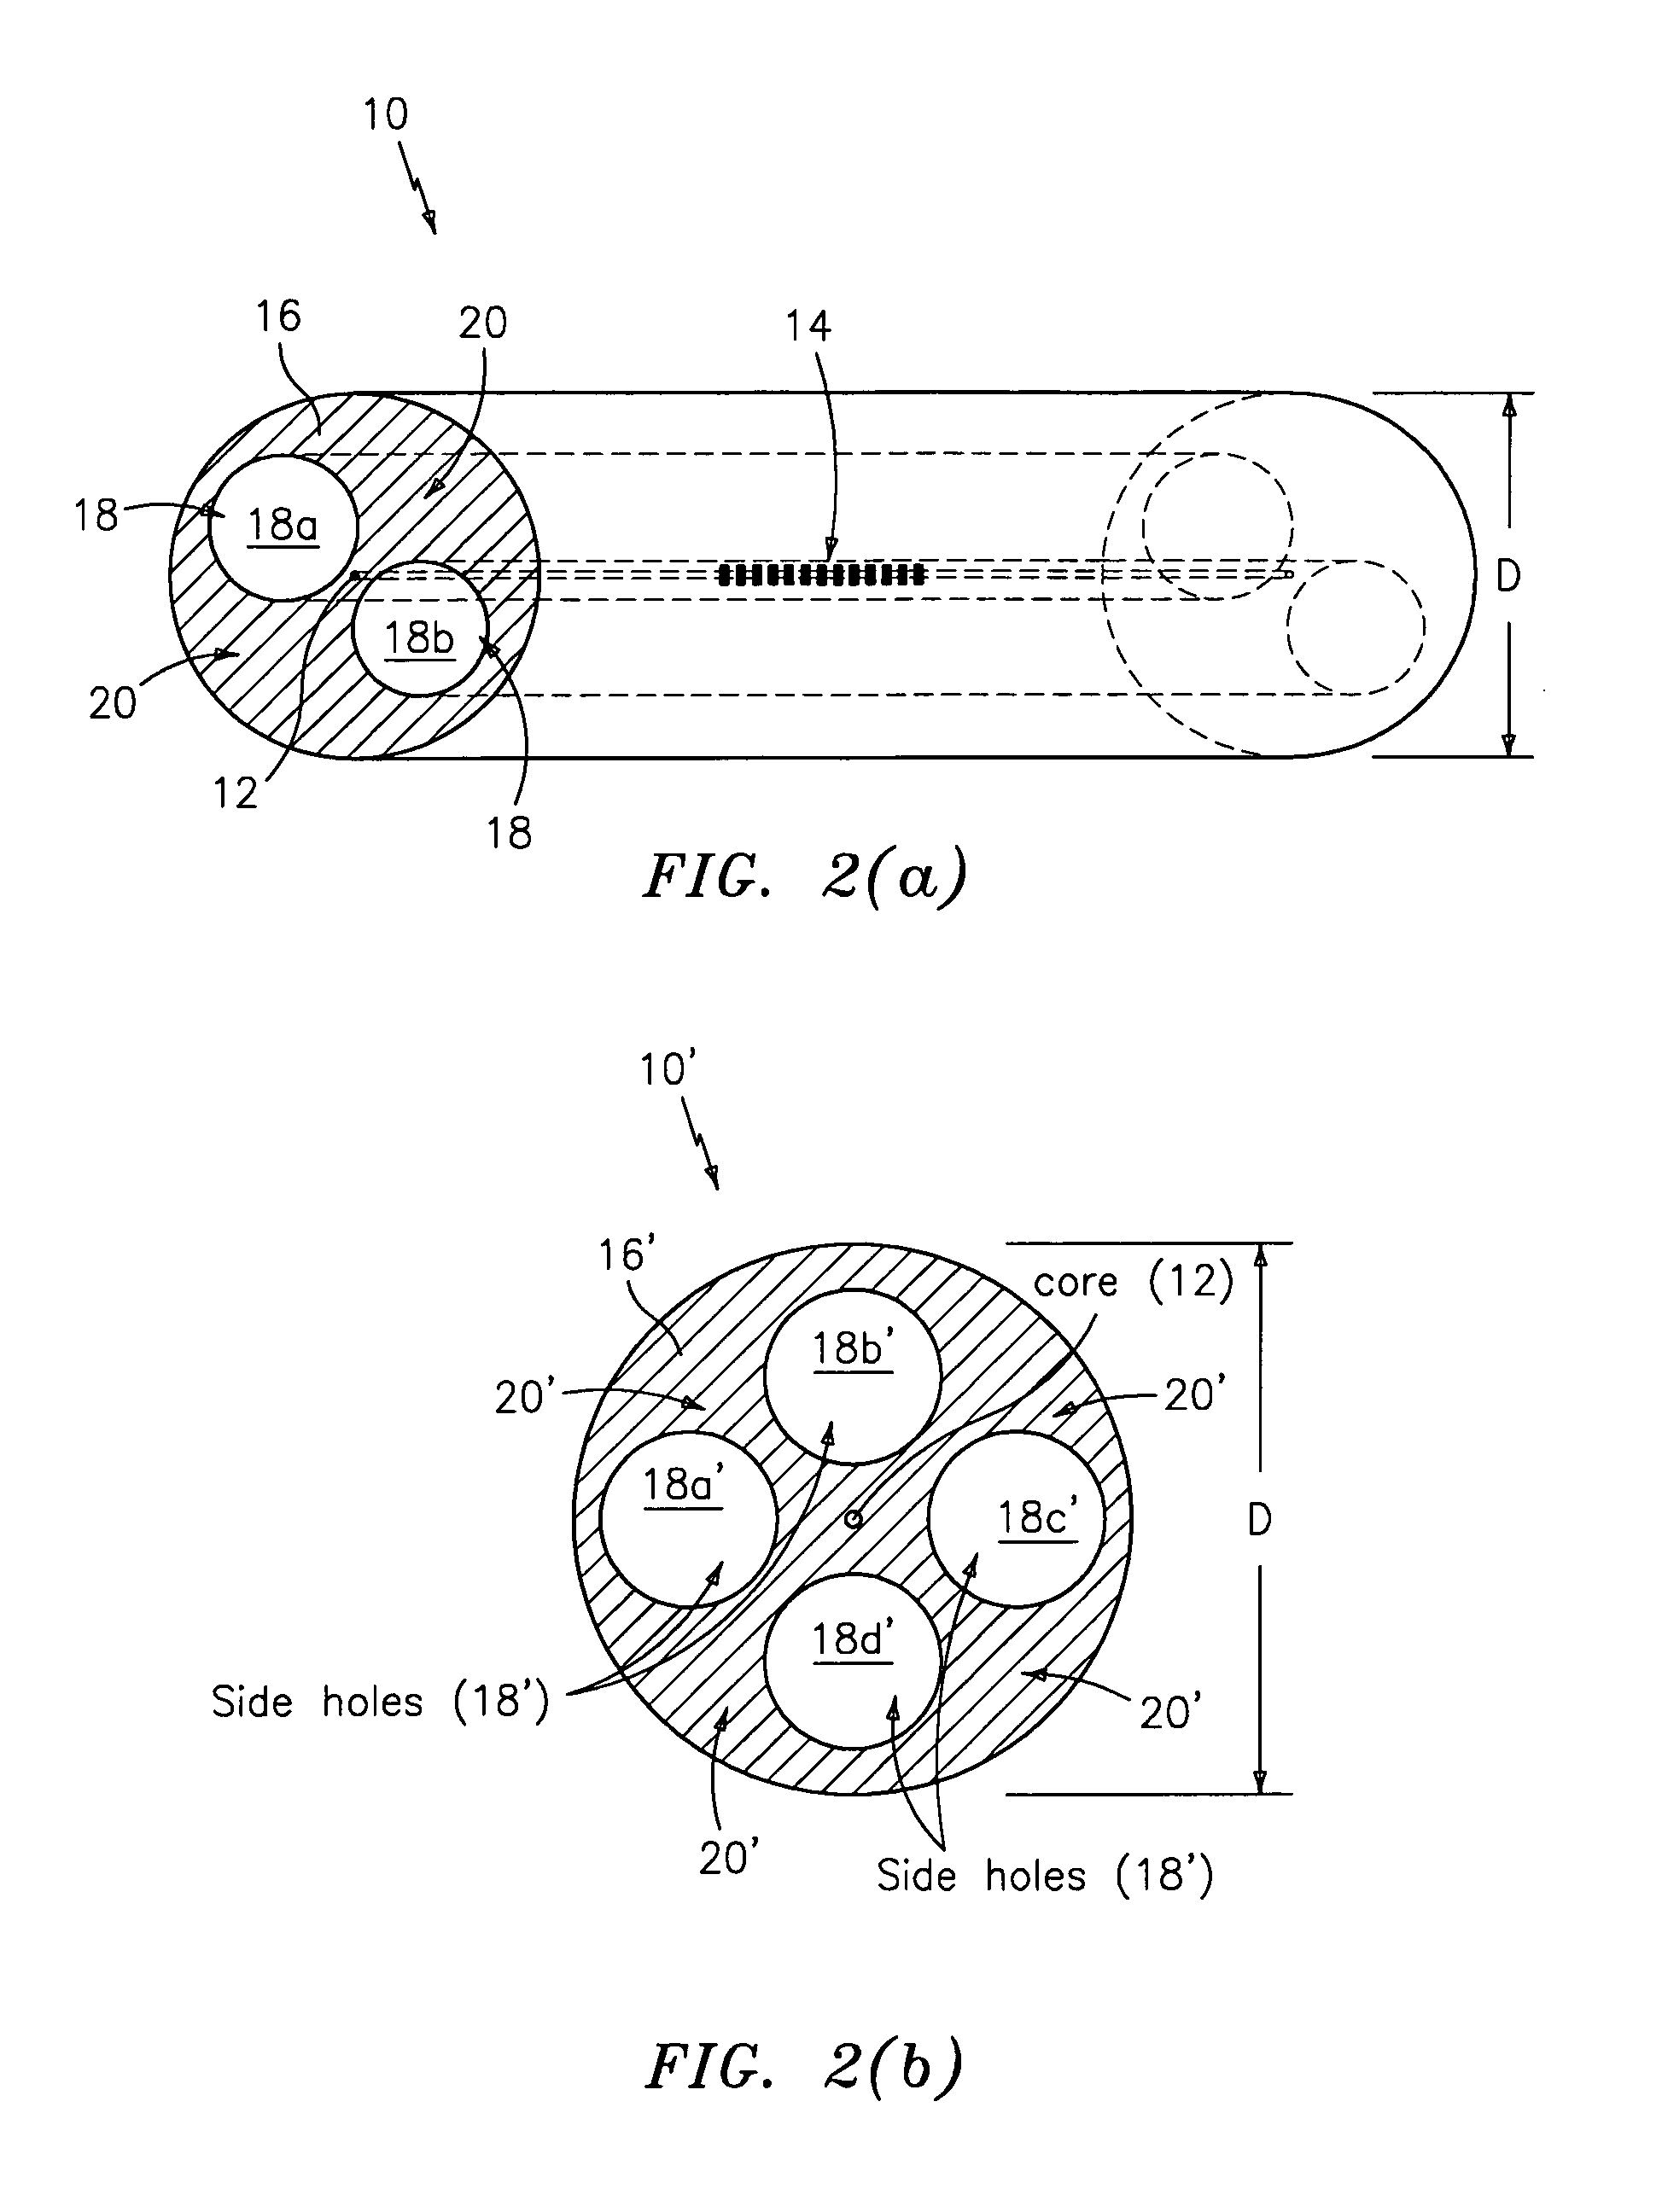 Tunable optical filter having large diameter optical waveguide with bragg grating and being configured for reducing the bulk modulus of compressibility thereof